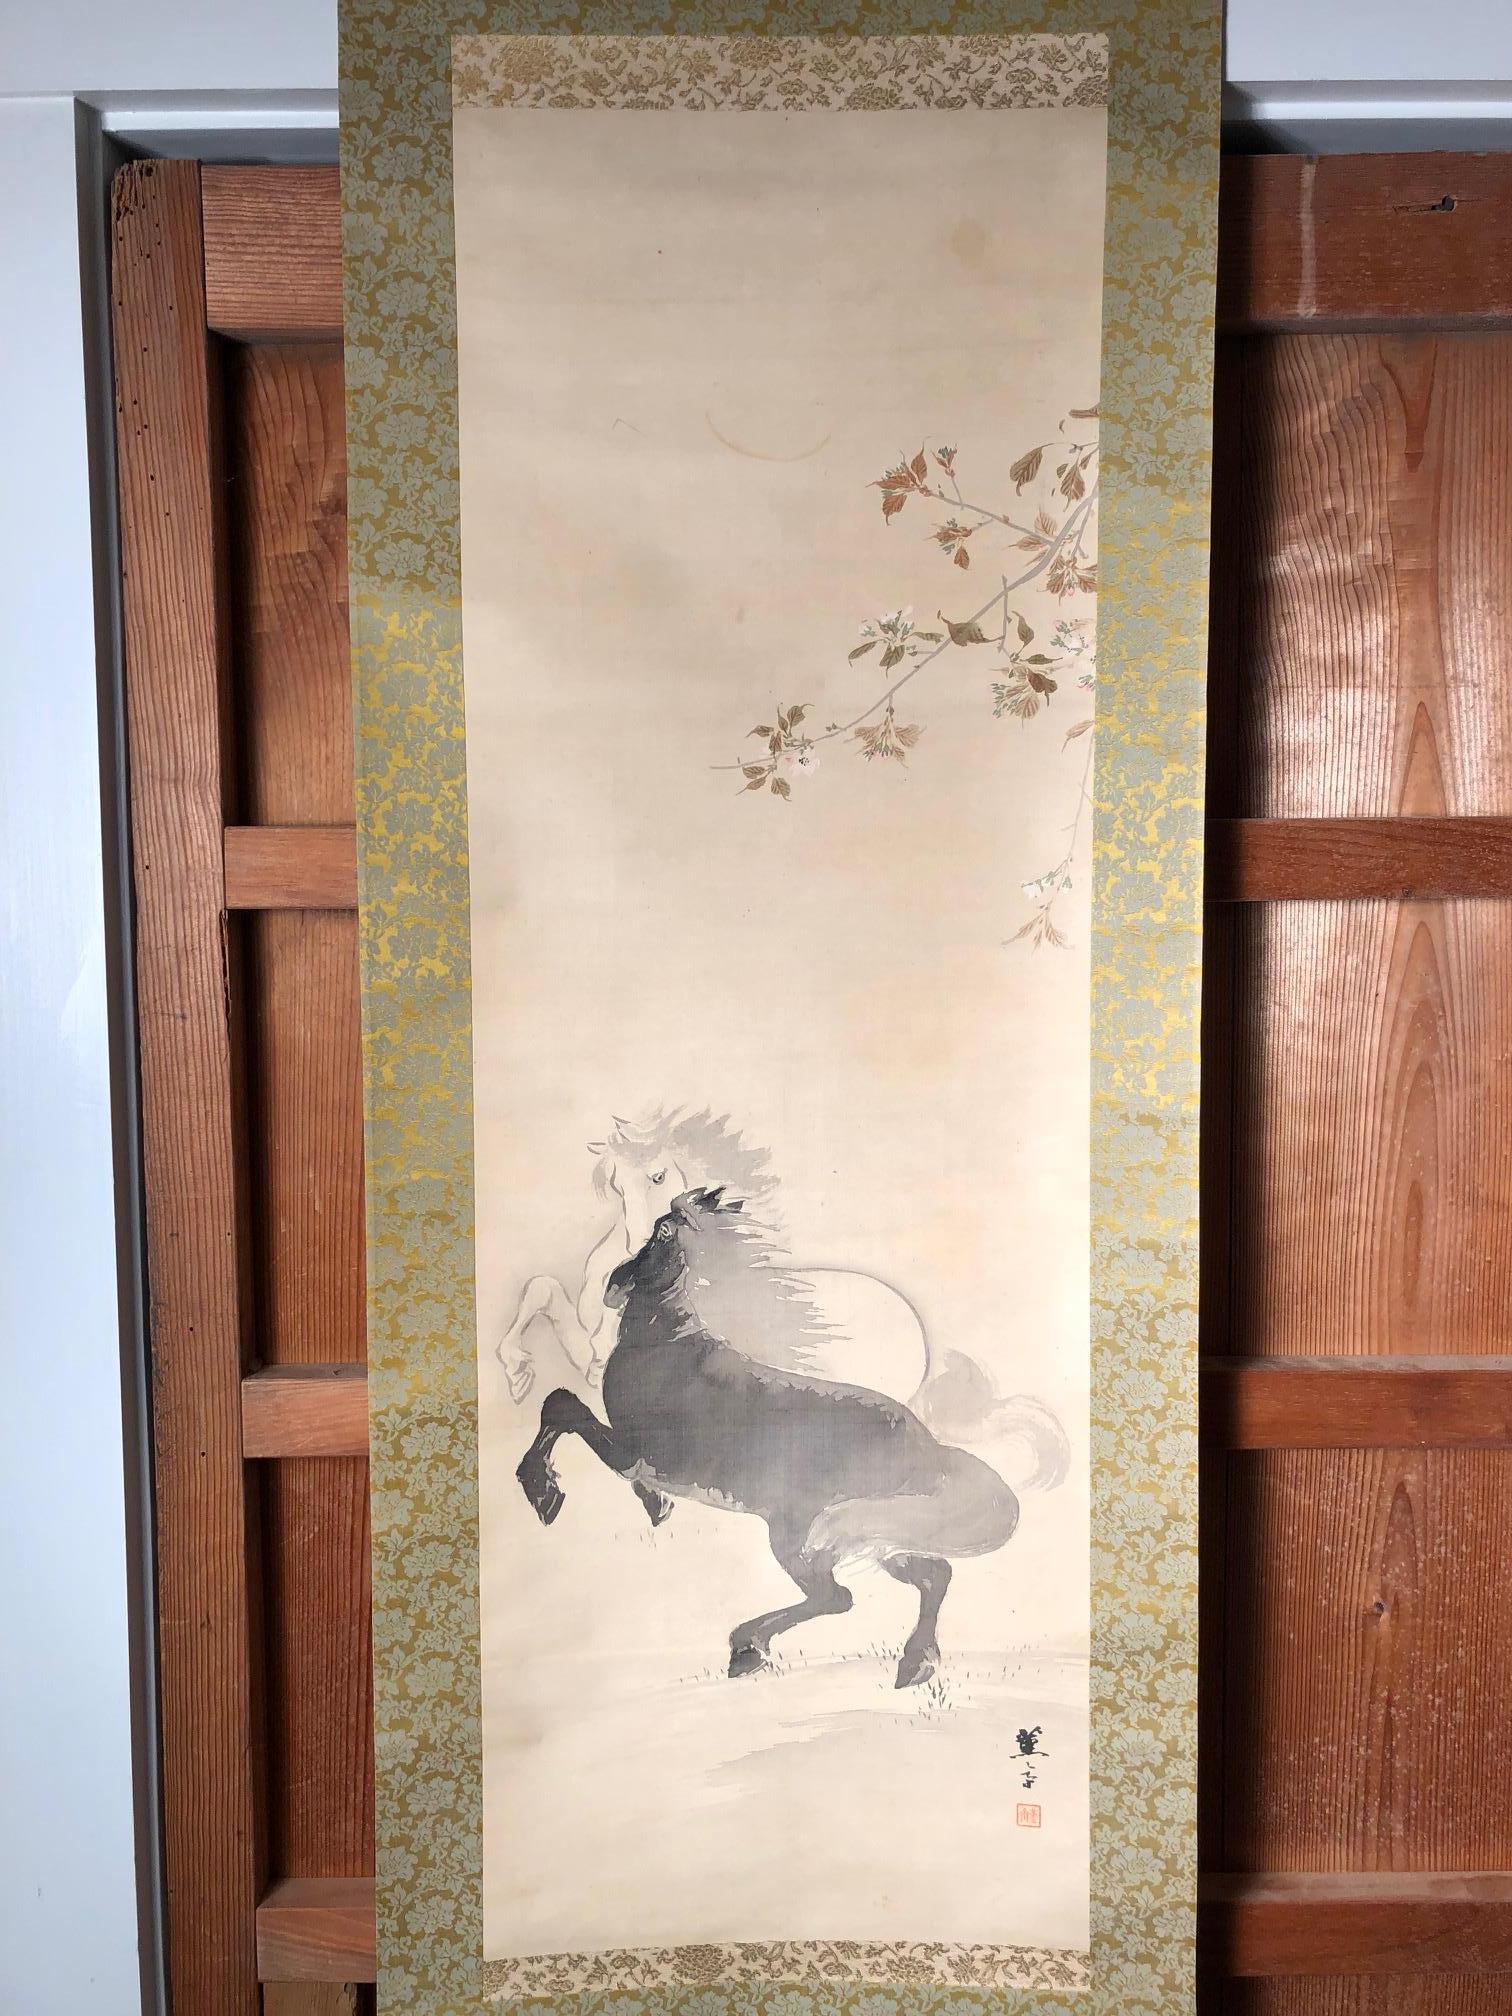 A bold, spectacular Japanese hand-brushed, hand-painted silk scroll of two horses- worthy of your favourite room
Hand painting on silk in simple soft pleasing colors, signed.

Inscription:
Artist: Kayoda
Bone rollers.

Japan, attractive composition